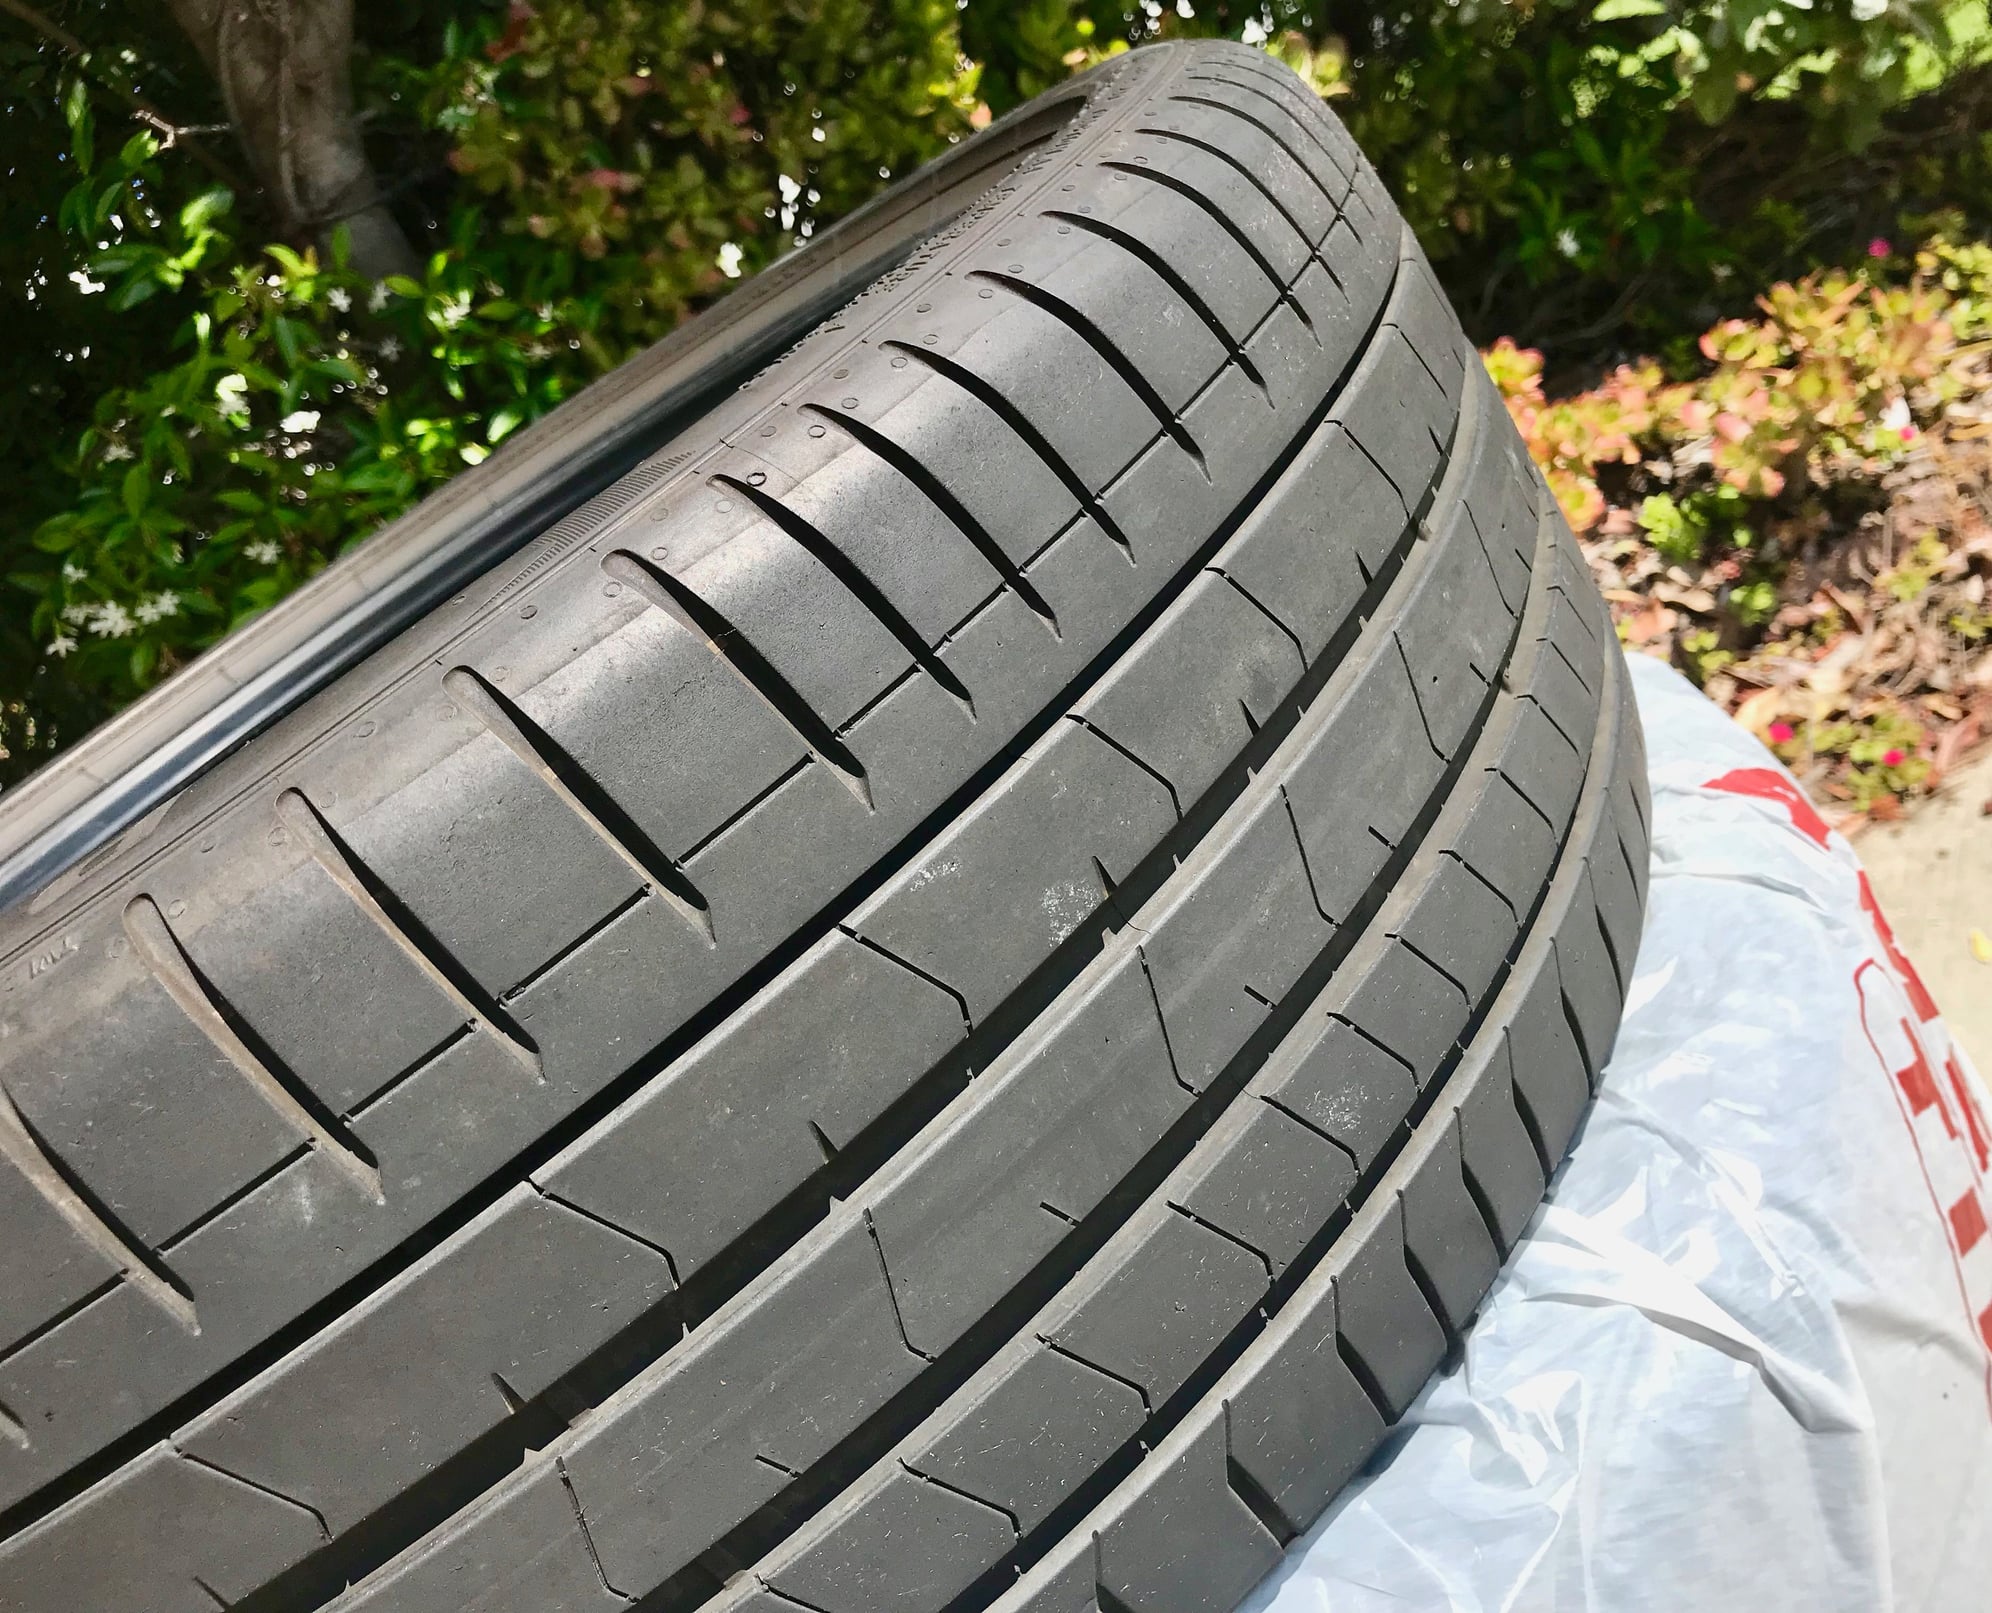 Wheels and Tires/Axles - Pirelli Tires from C43, 19", used 5504 mi., excellent condition, - Used - 2018 to 2019 Mercedes-Benz C43 AMG - Seal Beach, CA 90740, United States